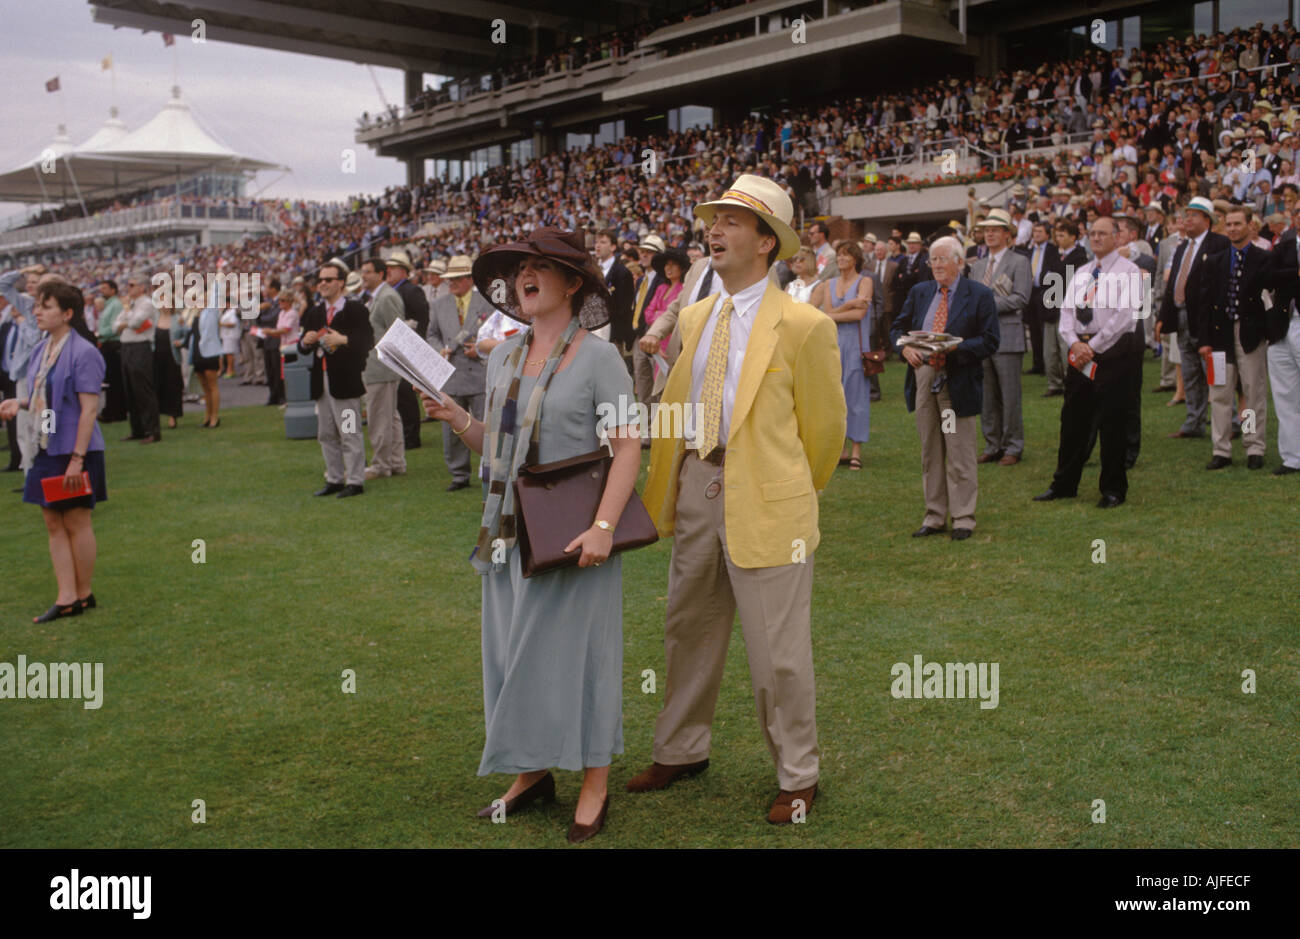 Goodwood Horse Races Sussex, Downs, England couple enjoying a day at the races 2000s HOMER SYKES Stock Photo